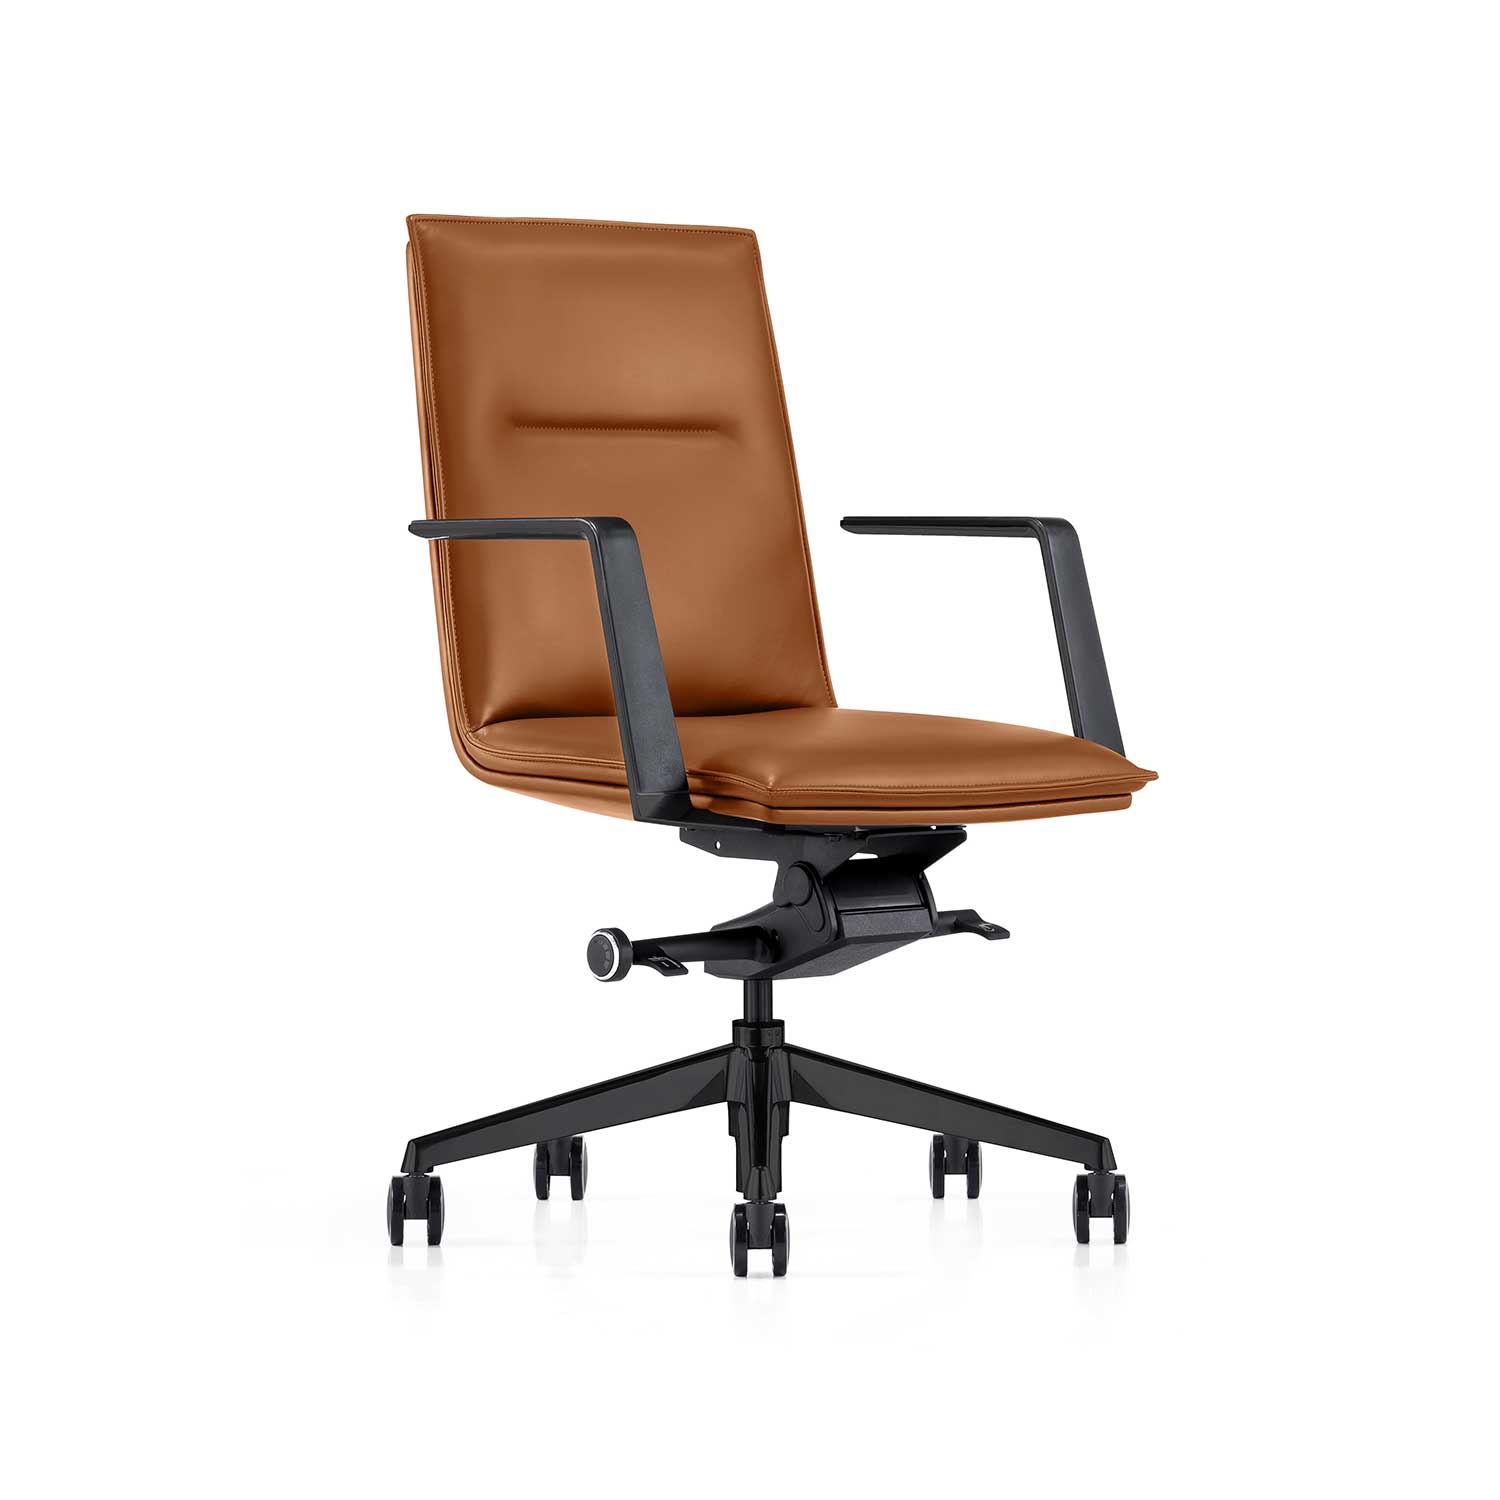 Milli Meeting Chair Amelie Tan Leather BLK